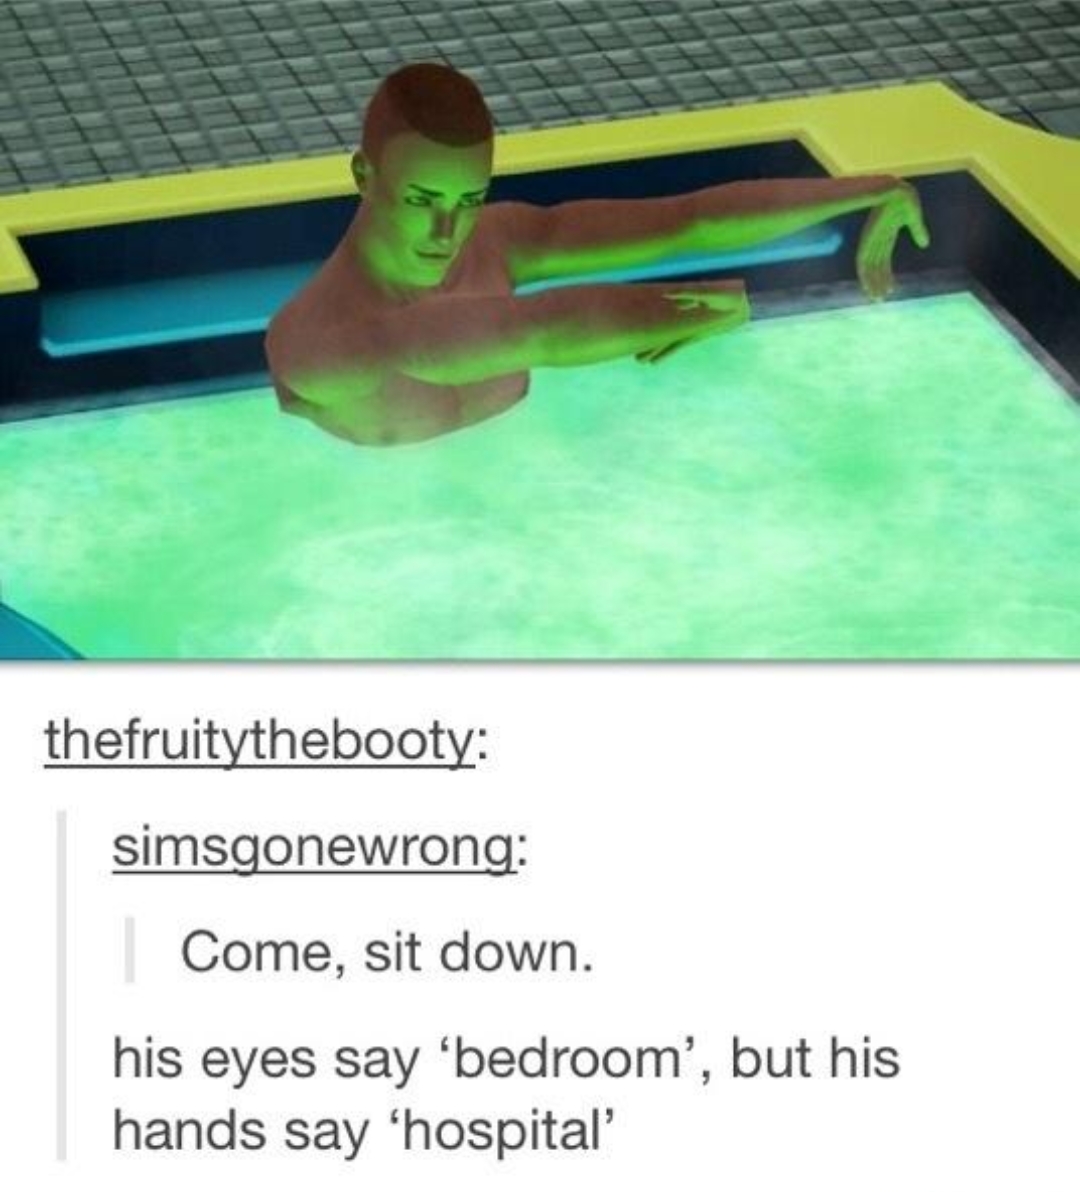 sims his eyes say bedroom - thefruitythebooty simsgonewrong Come, sit down. his eyes say 'bedroom', but his hands say 'hospital